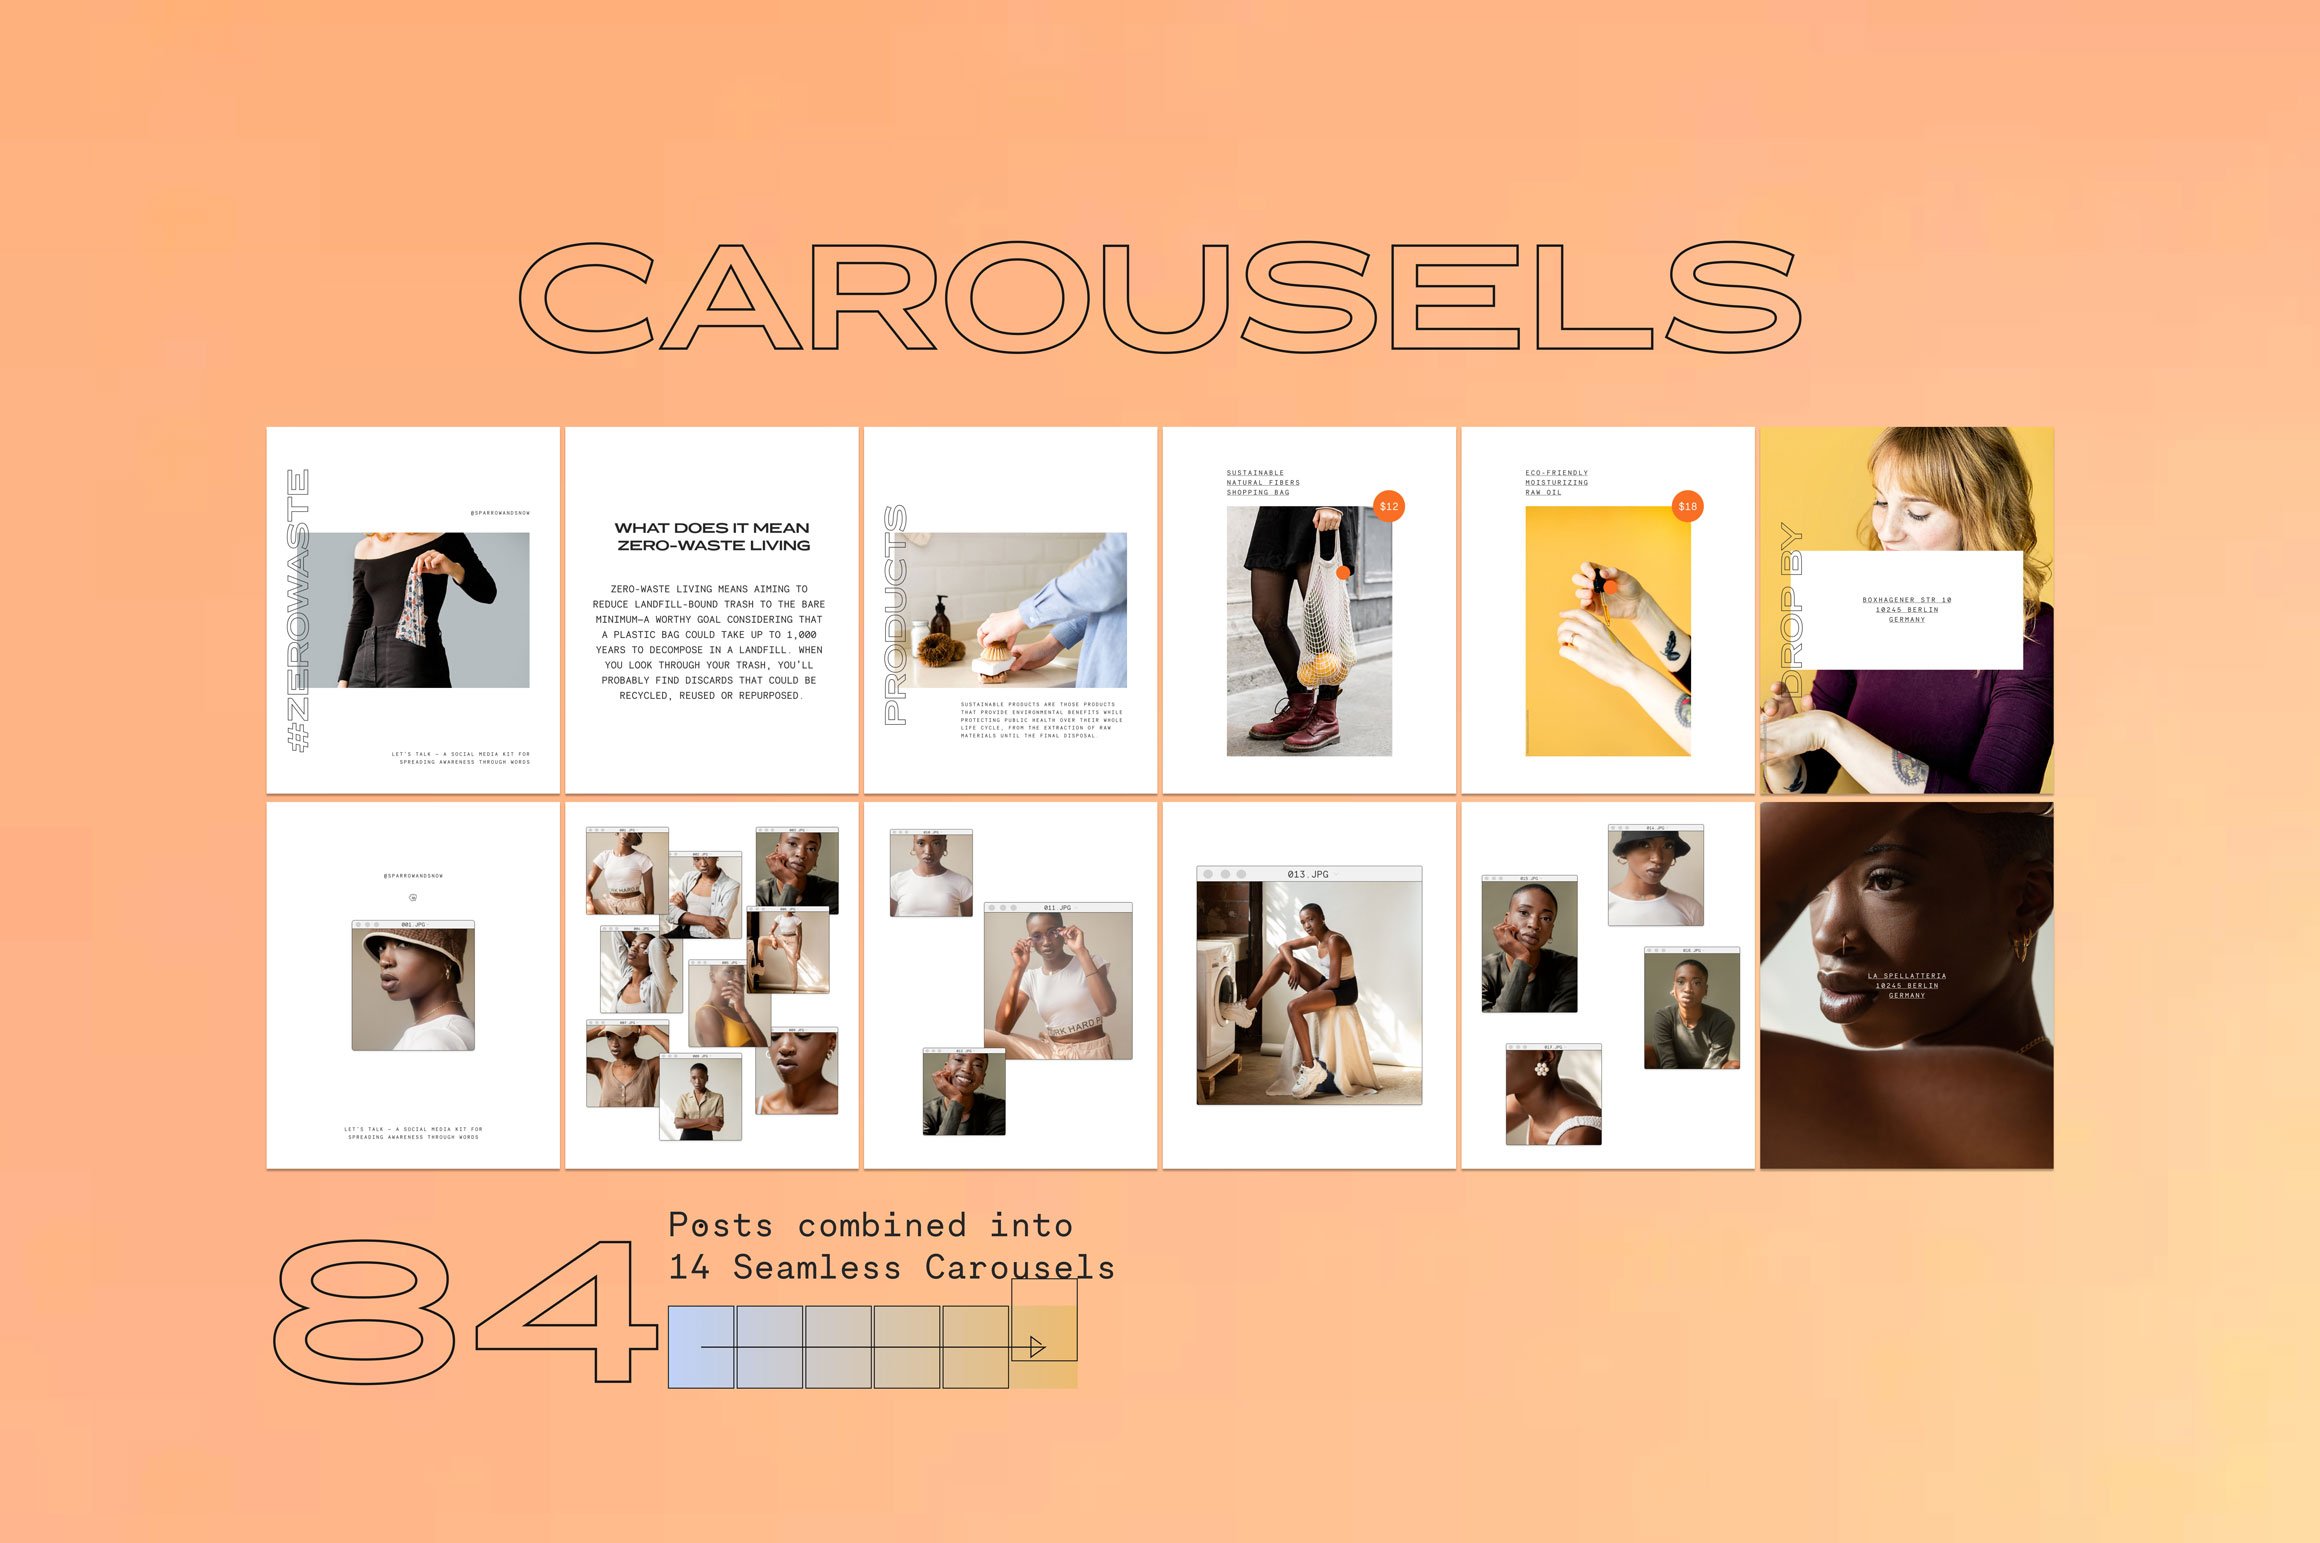 Let's Talk Carousel and Quotes